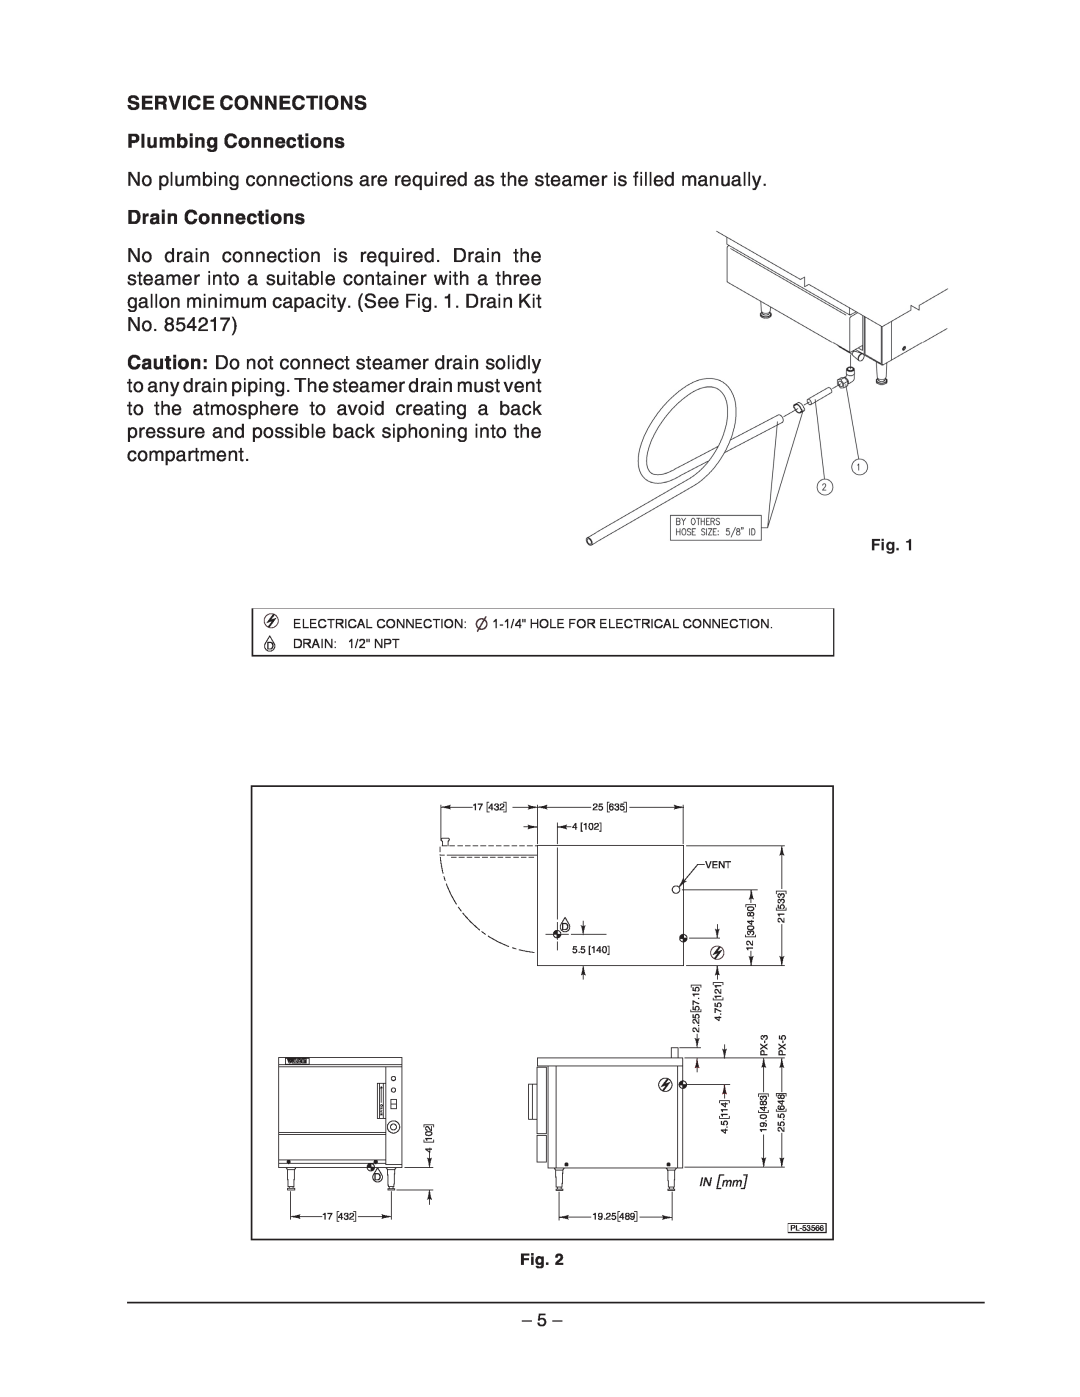 Vulcan-Hart VPX3, VPX5, ML- 126588, ML- 126586 operation manual SERVICE CONNECTIONS Plumbing Connections, Drain Connections 